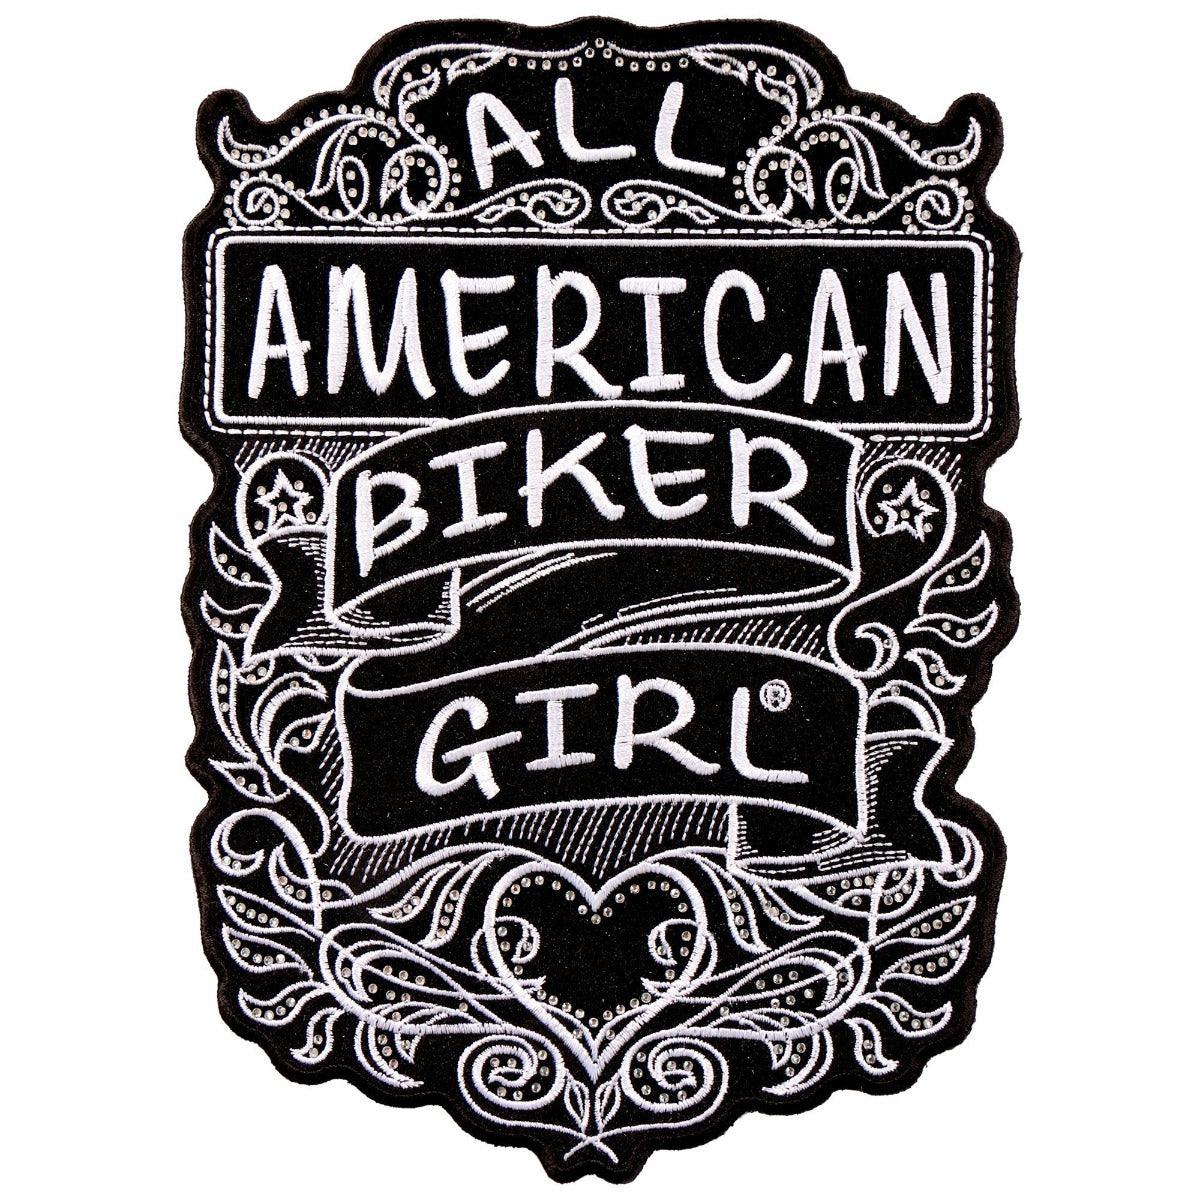 Hot Leathers 6" X 8" All American Biker Girl Patch - American Legend Rider